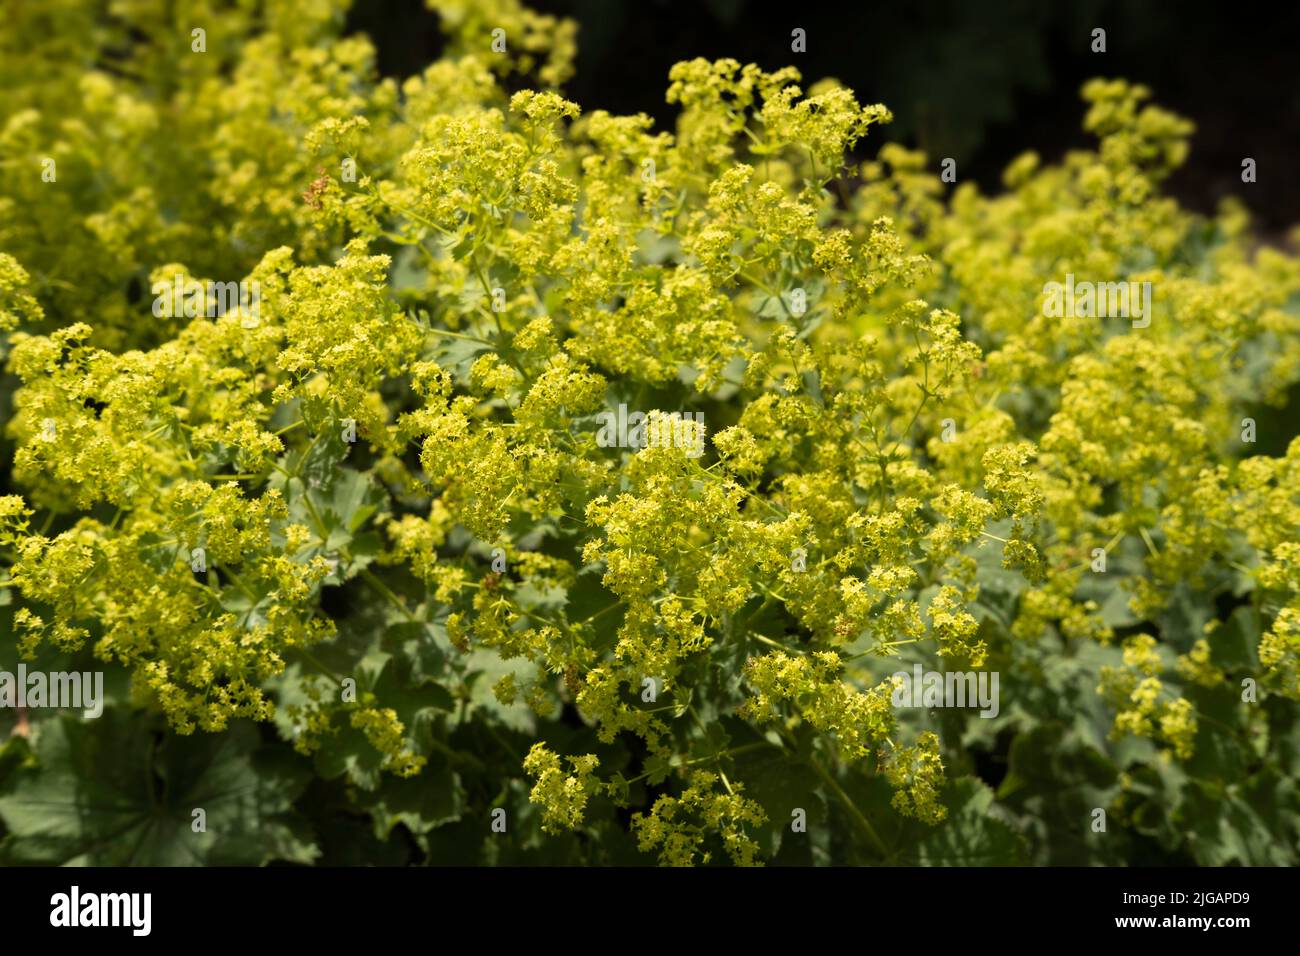 Yellowish-green flowers form clusters of Lady's Mantle or Alchemilla mollis or vulgaris in a summer garden Stock Photo